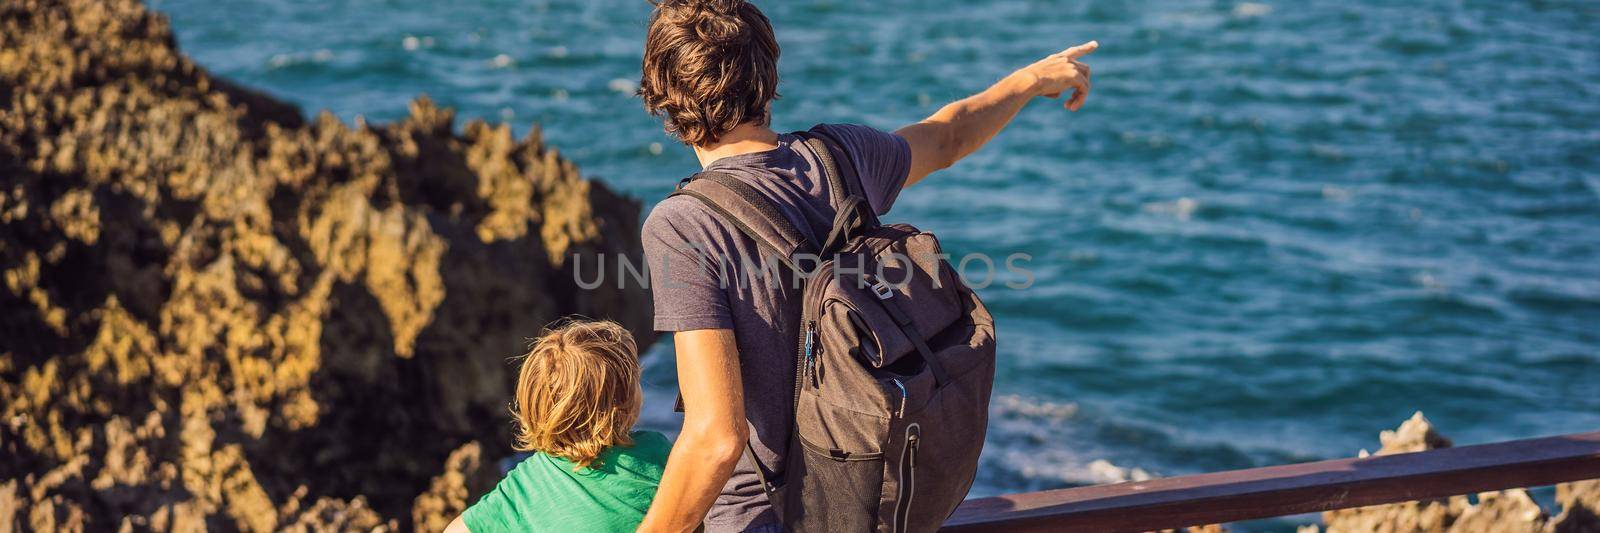 Father and son travelers on amazing Nusadua, Waterbloom Fountain, Bali Island Indonesia. Traveling with kids concept. BANNER, LONG FORMAT